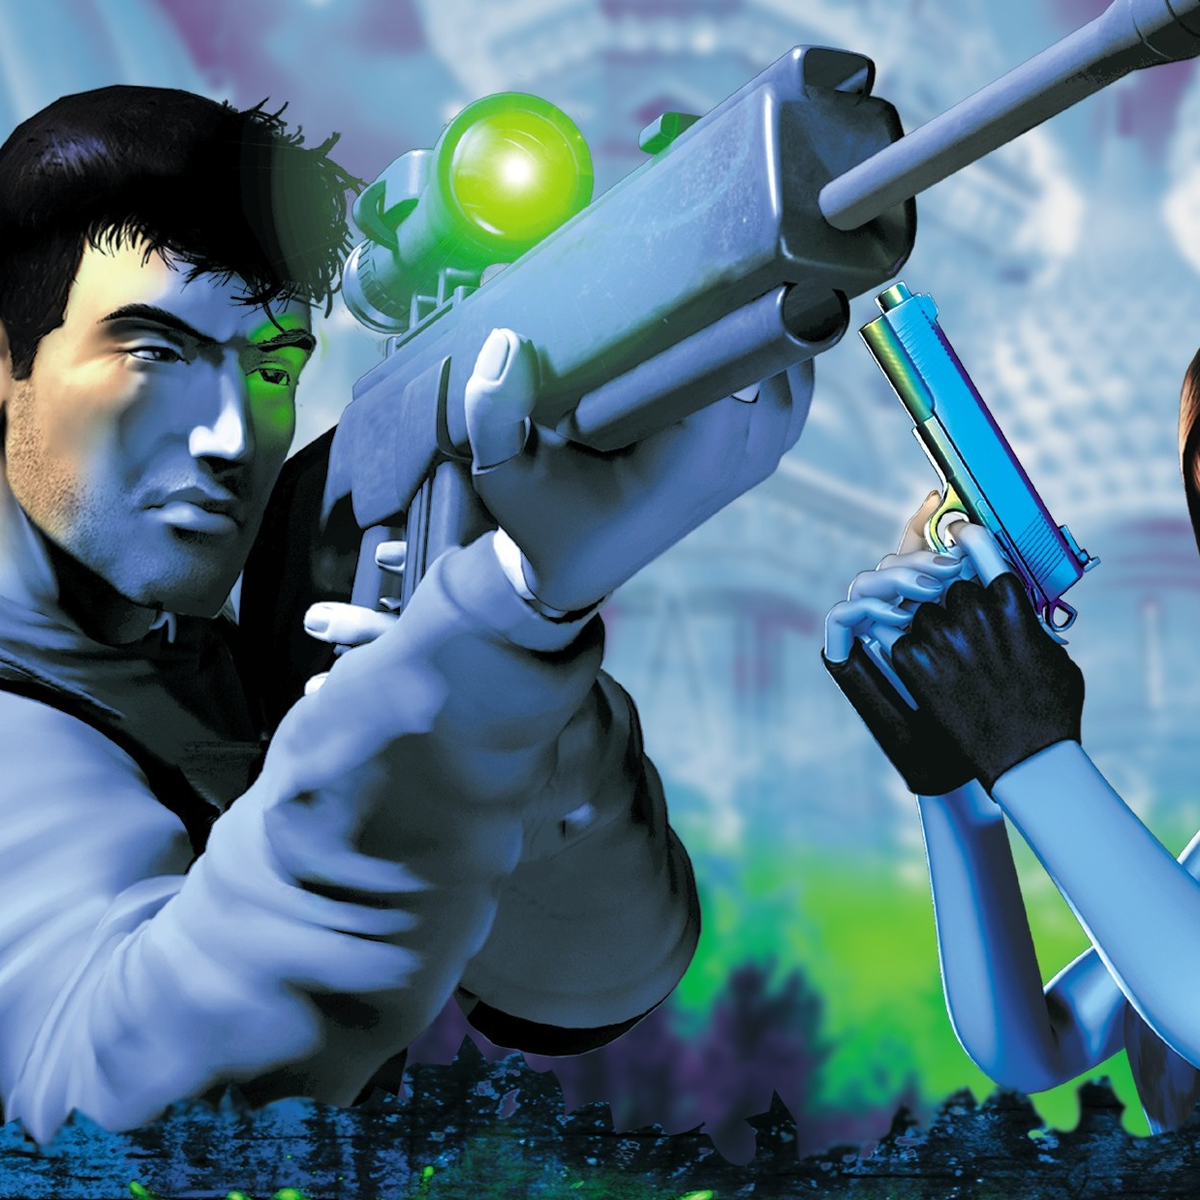 Syphon Filter 2 is first PS Plus PS1 game with 50hz/60hz region